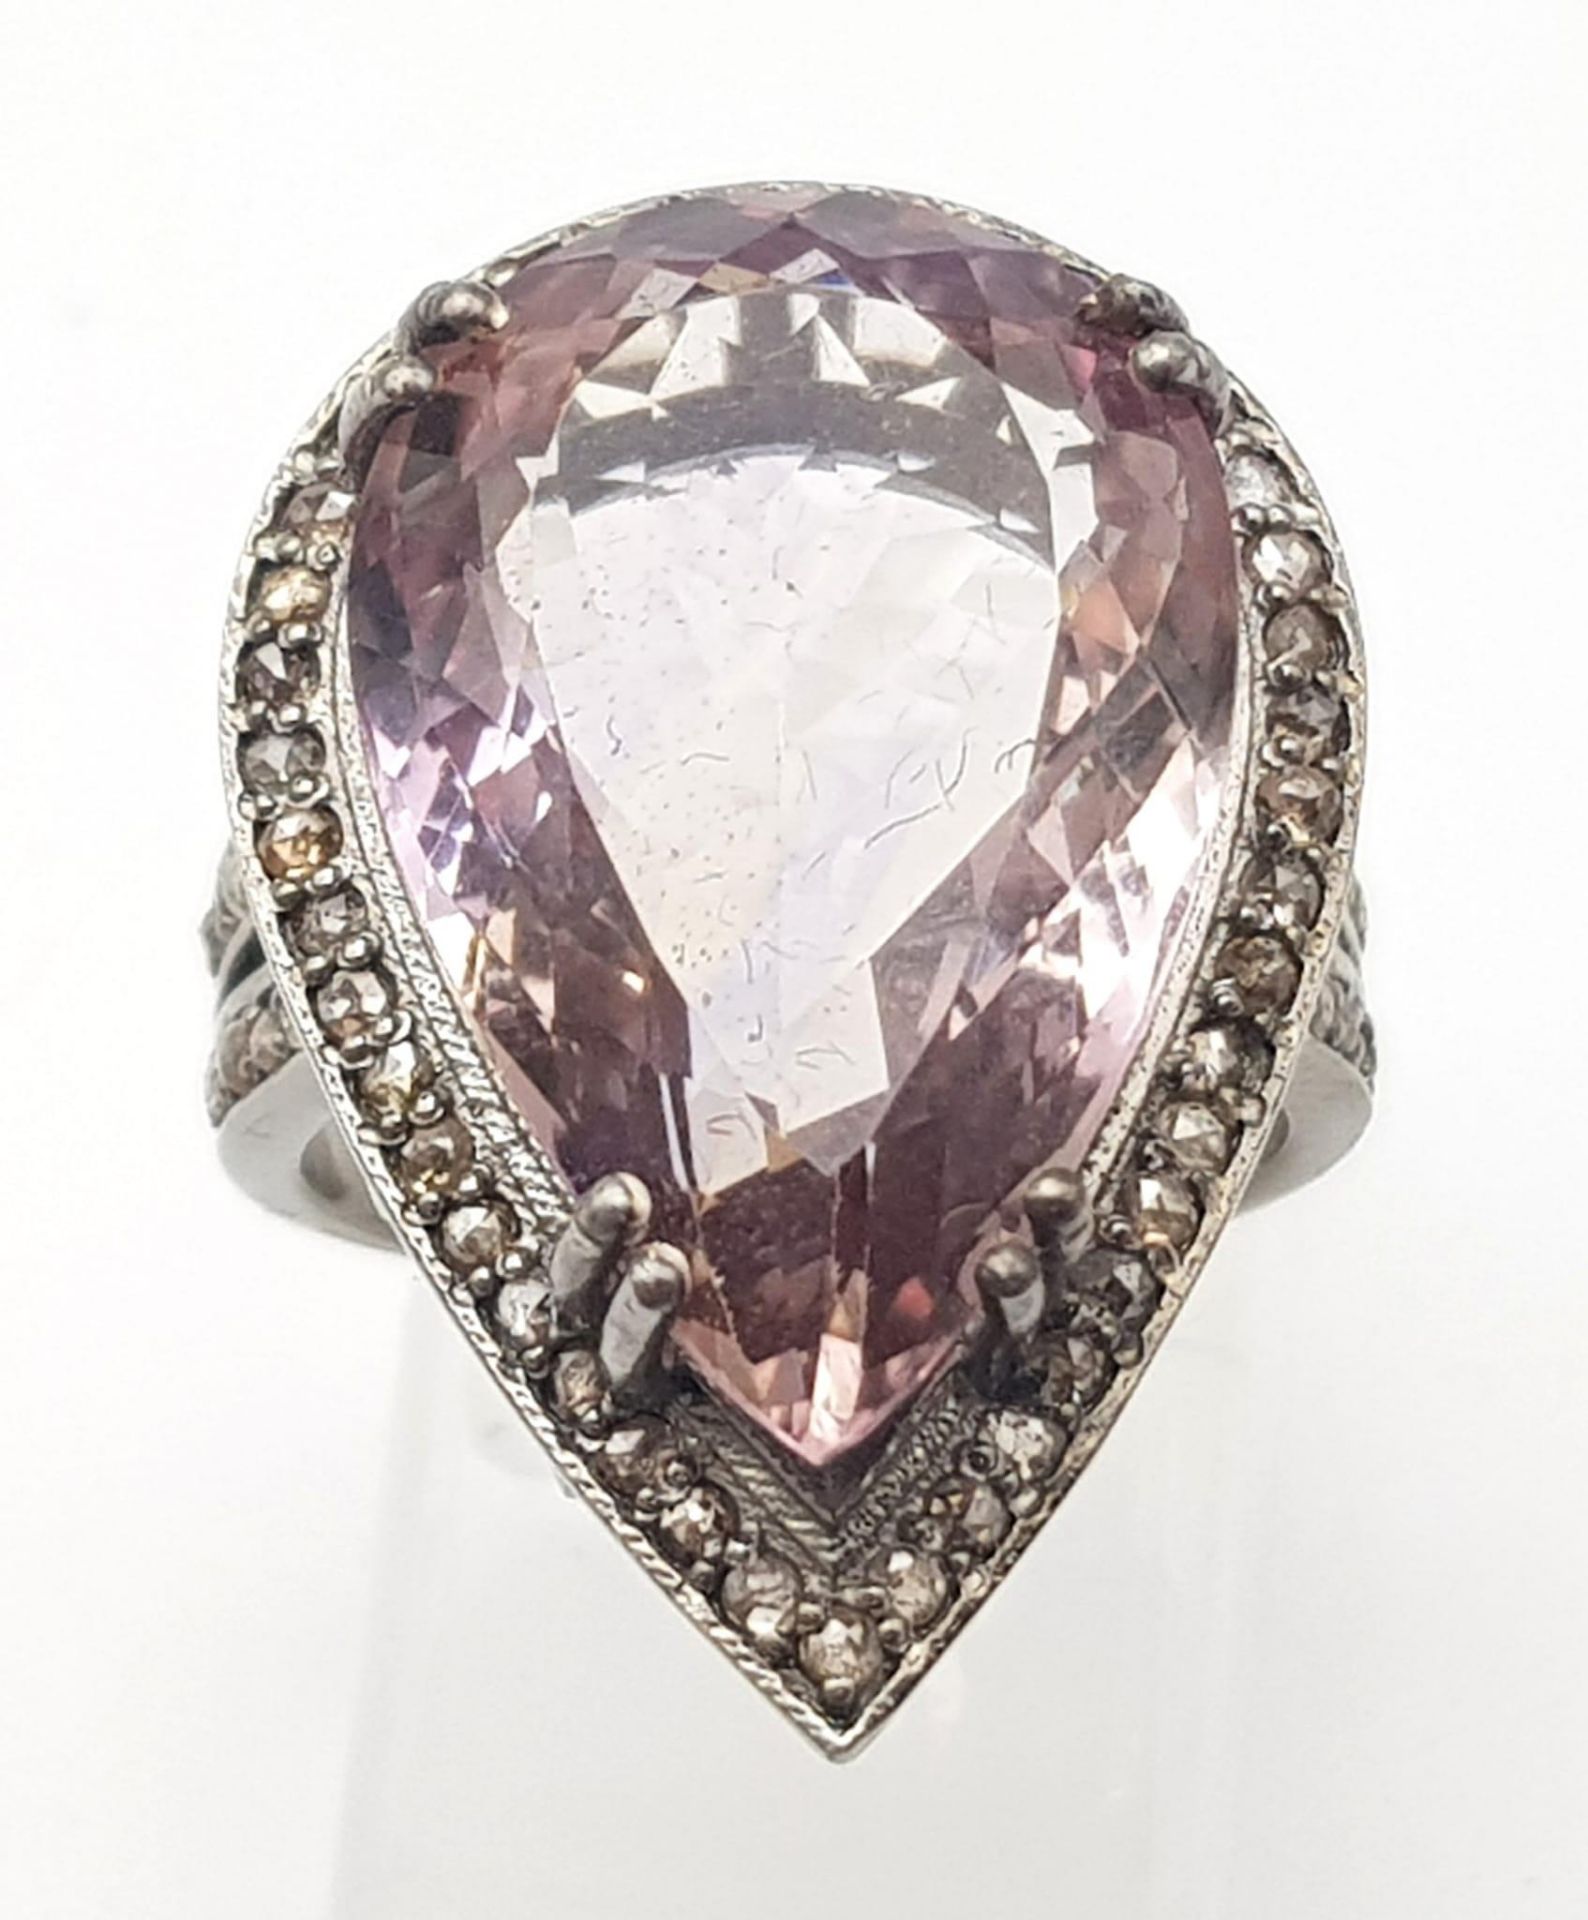 A 15ct Amethyst Gemstone Ring with 0.90ctw of Diamonds set in 925 Silver. A beautiful pear shaped - Image 2 of 5